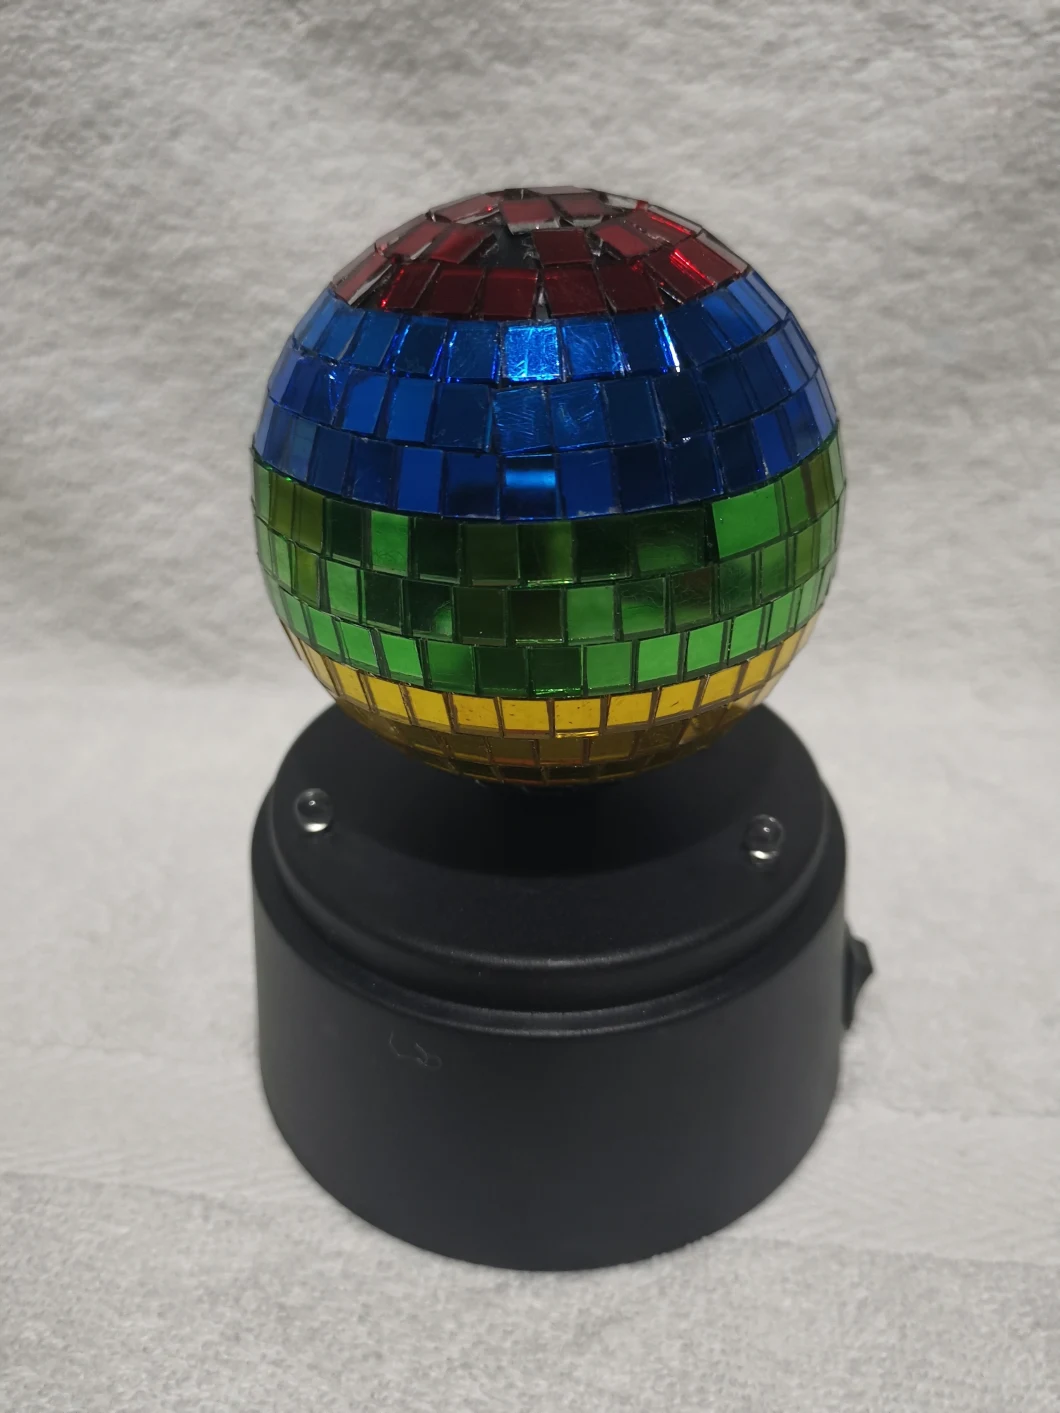 Mirror Ball Party Disco Ball Irradiancy & Running Table Lamp Arts & Crafts Light